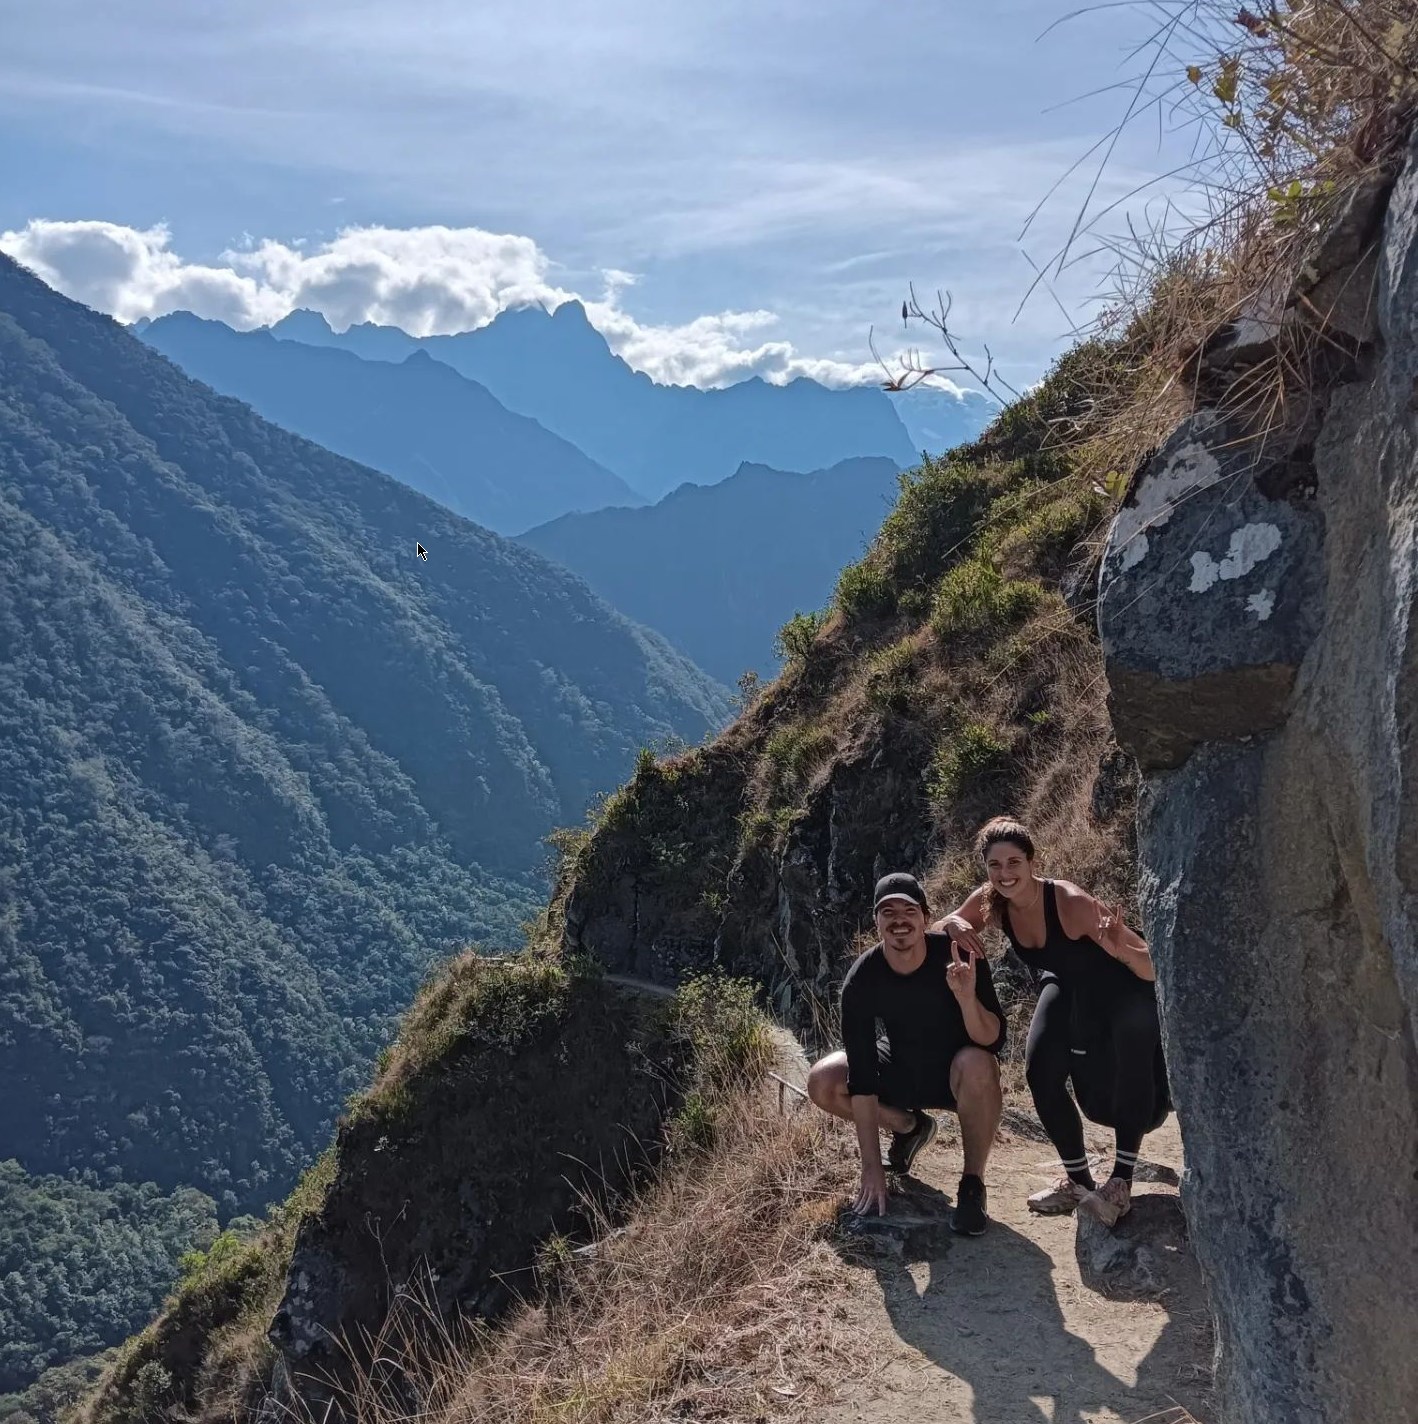 Two hikers on a mountain trail with scenic view of peaks